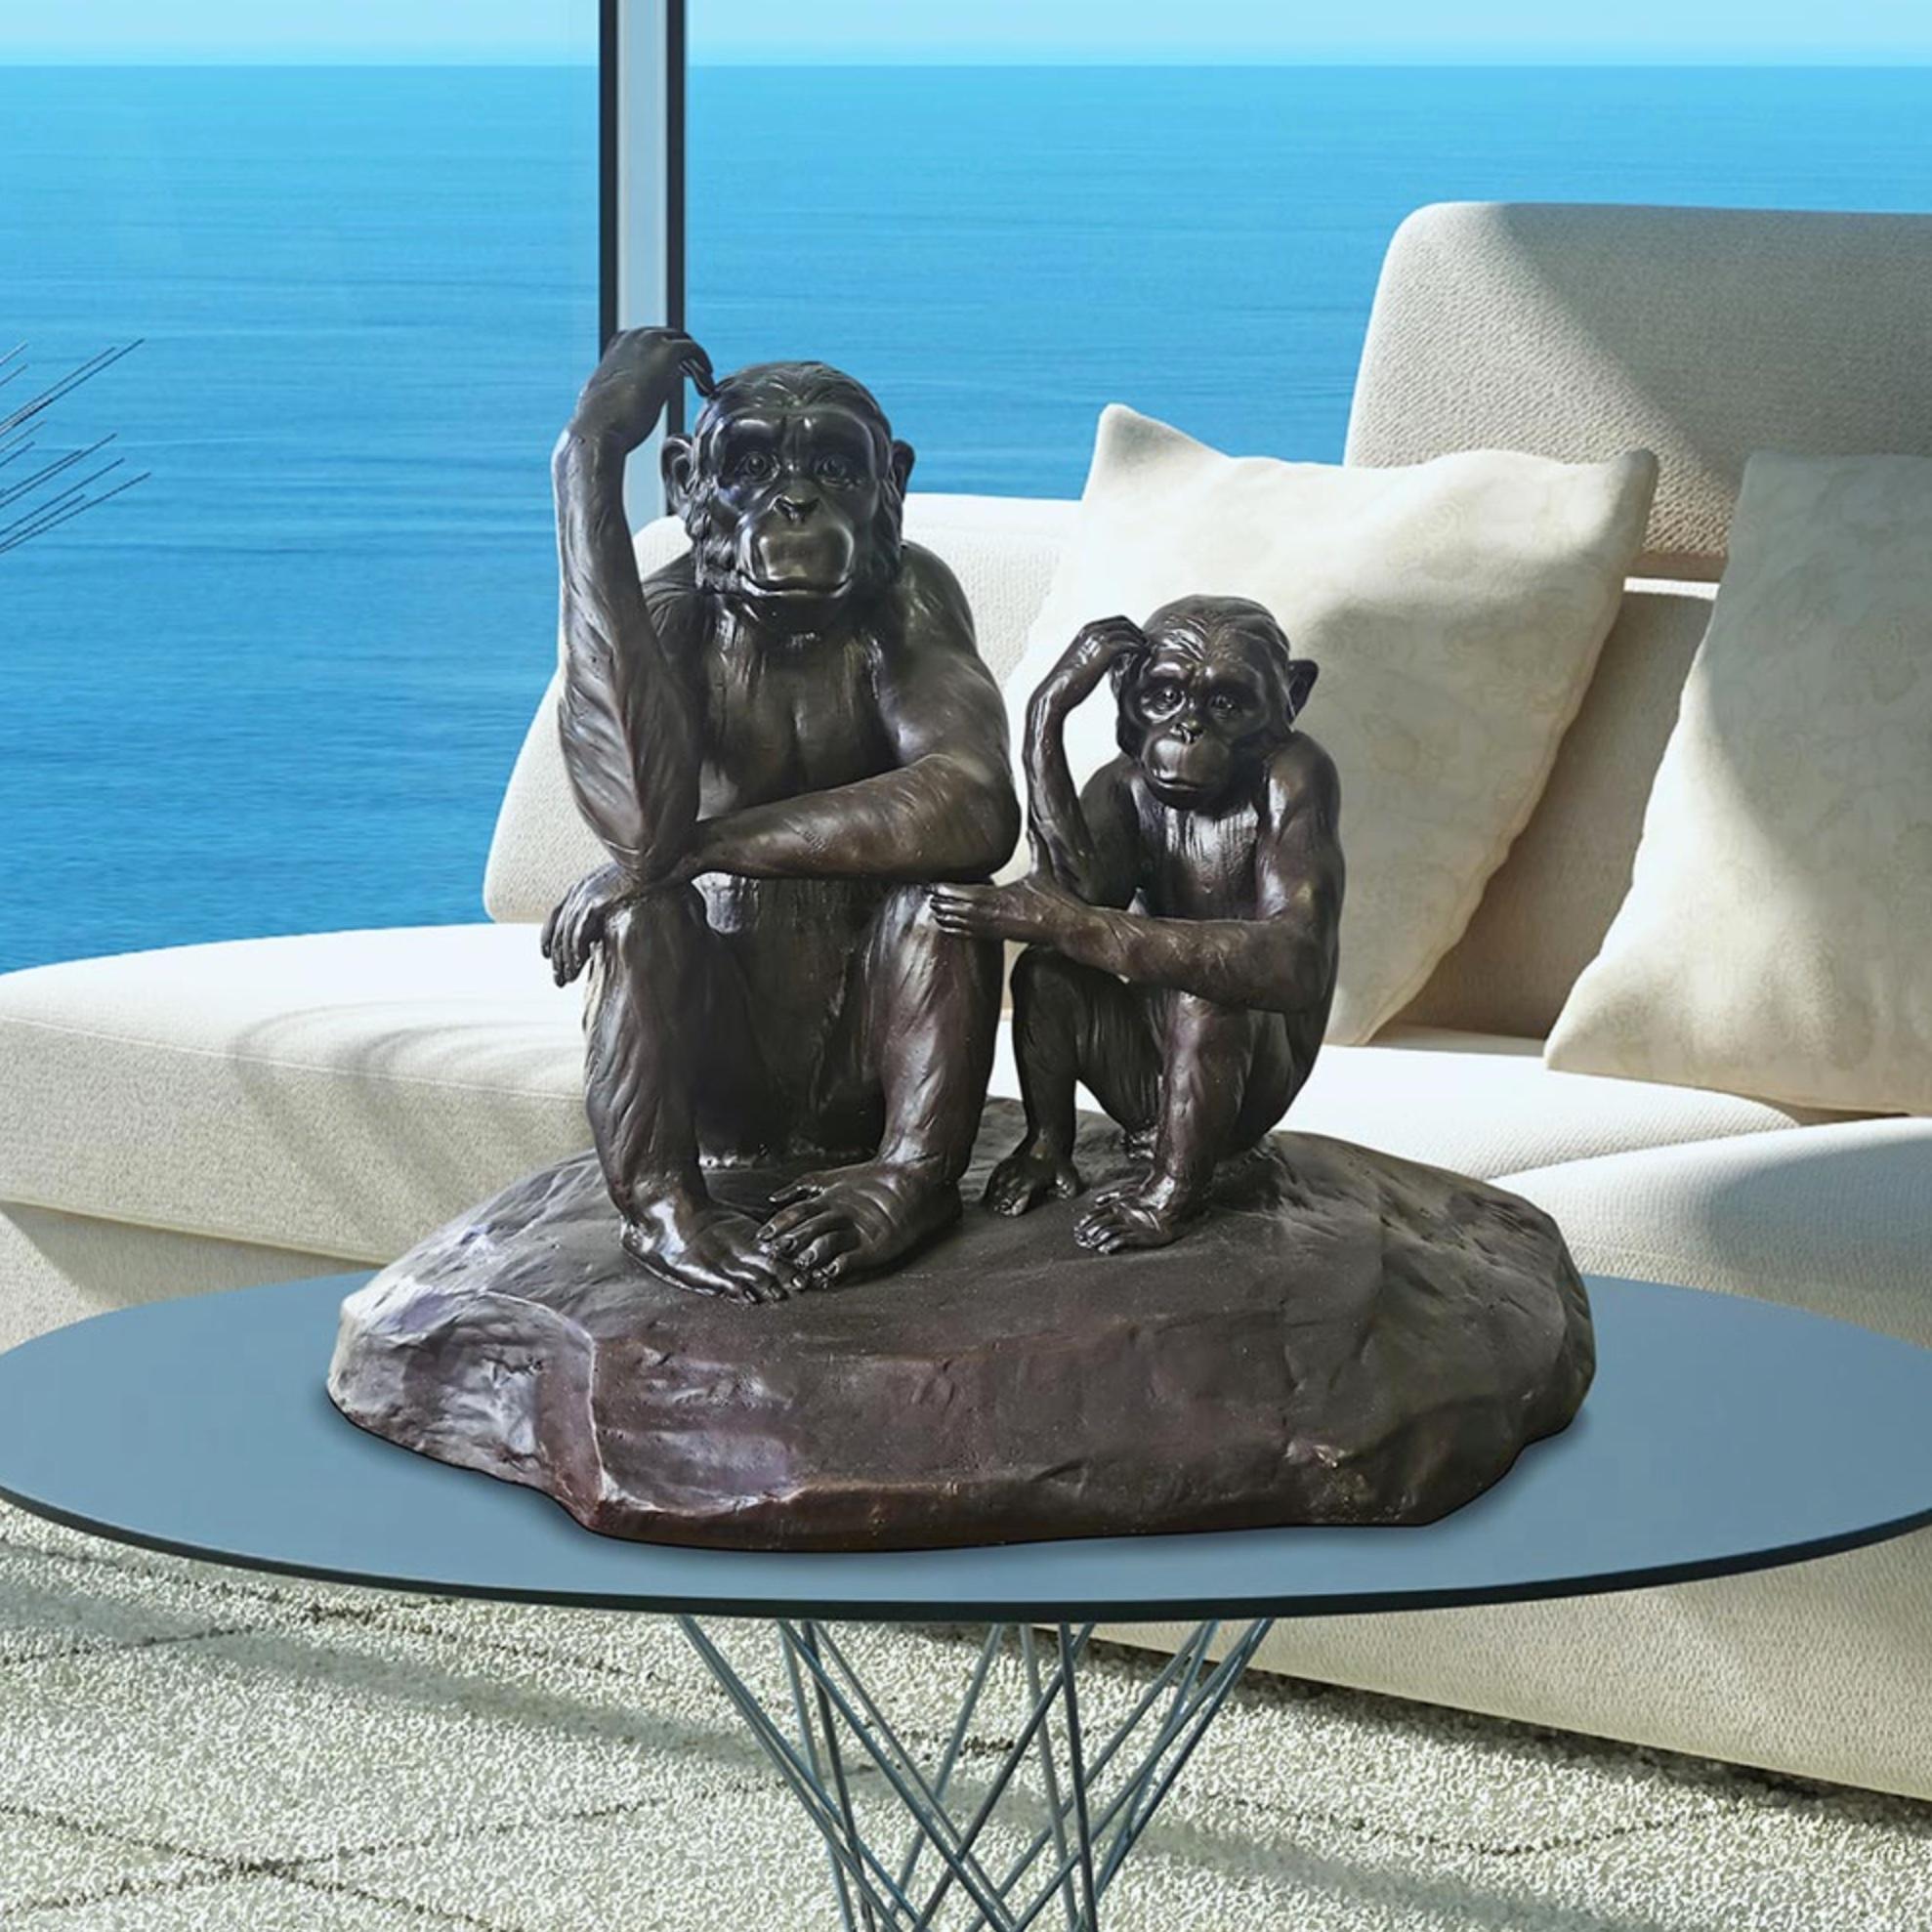 Title: Chimp Imitation
Authentic bronze sculpture

This authentic bronze sculpture titled 'Chimp Imitation' by artists Gillie and Marc has been meticulously crafted in bronze. It features a baby chimp imitating his mother and comes in a